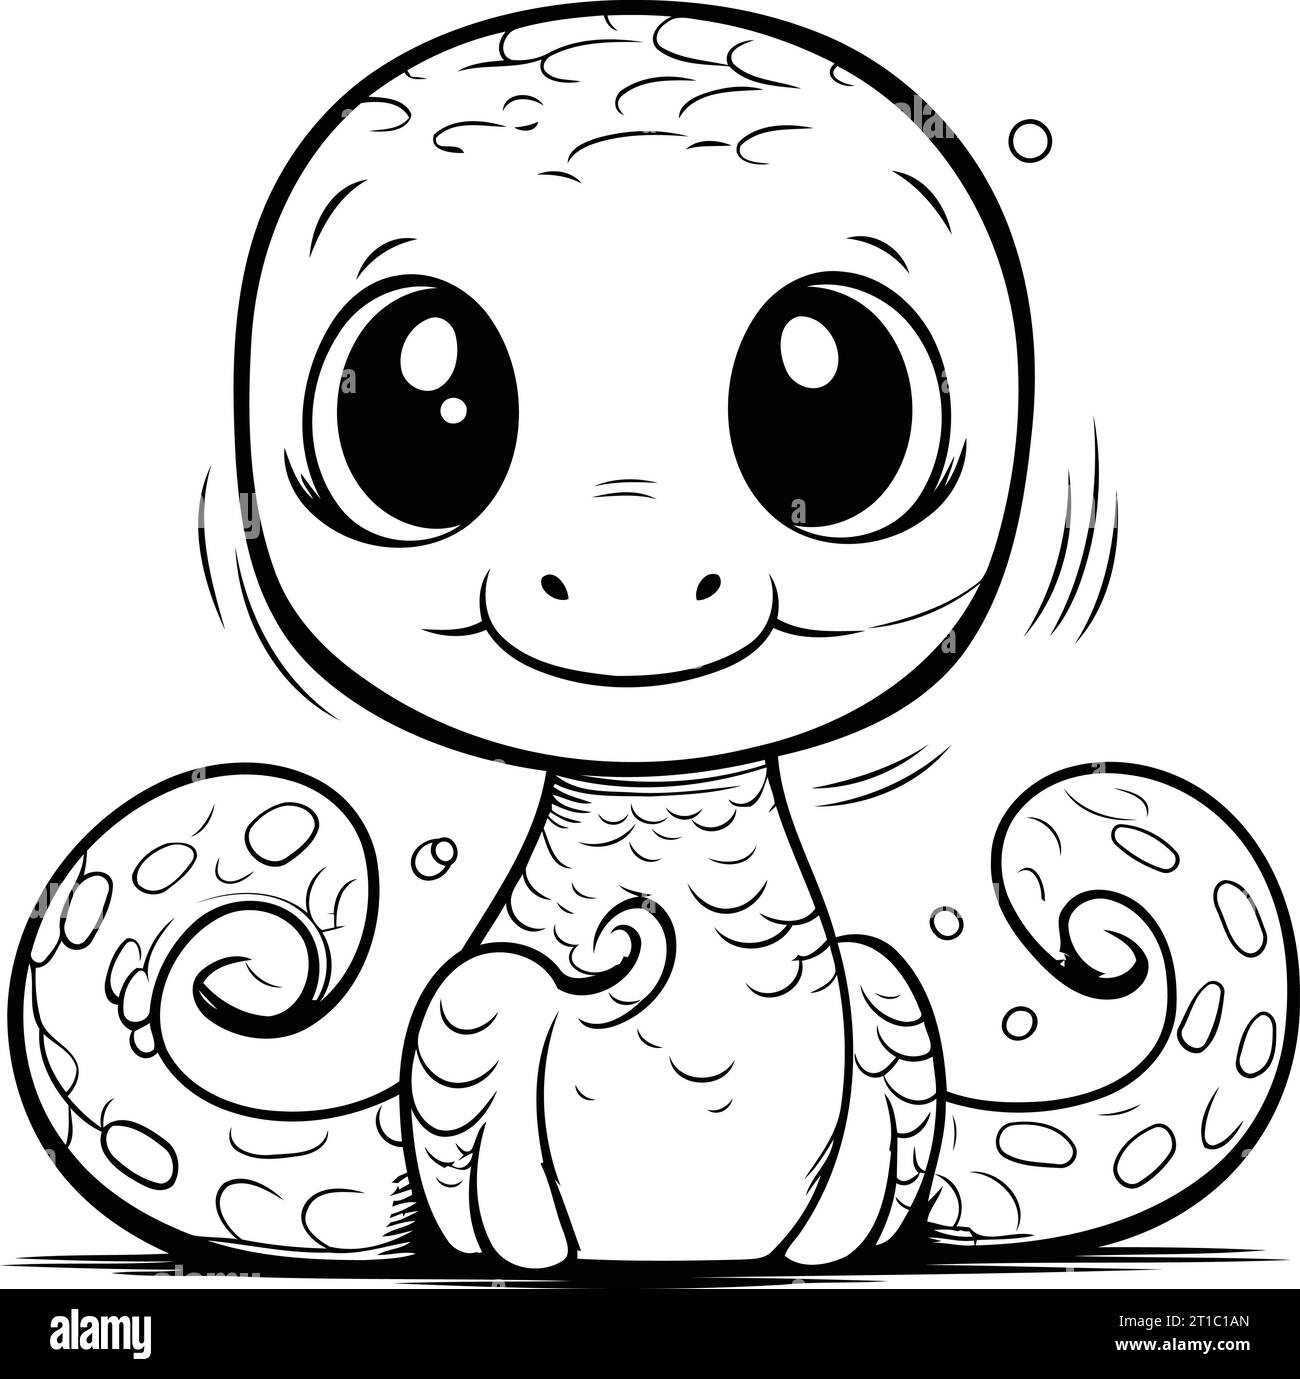 Cute baby snake. Black and white vector illustration for coloring book. Stock Vector